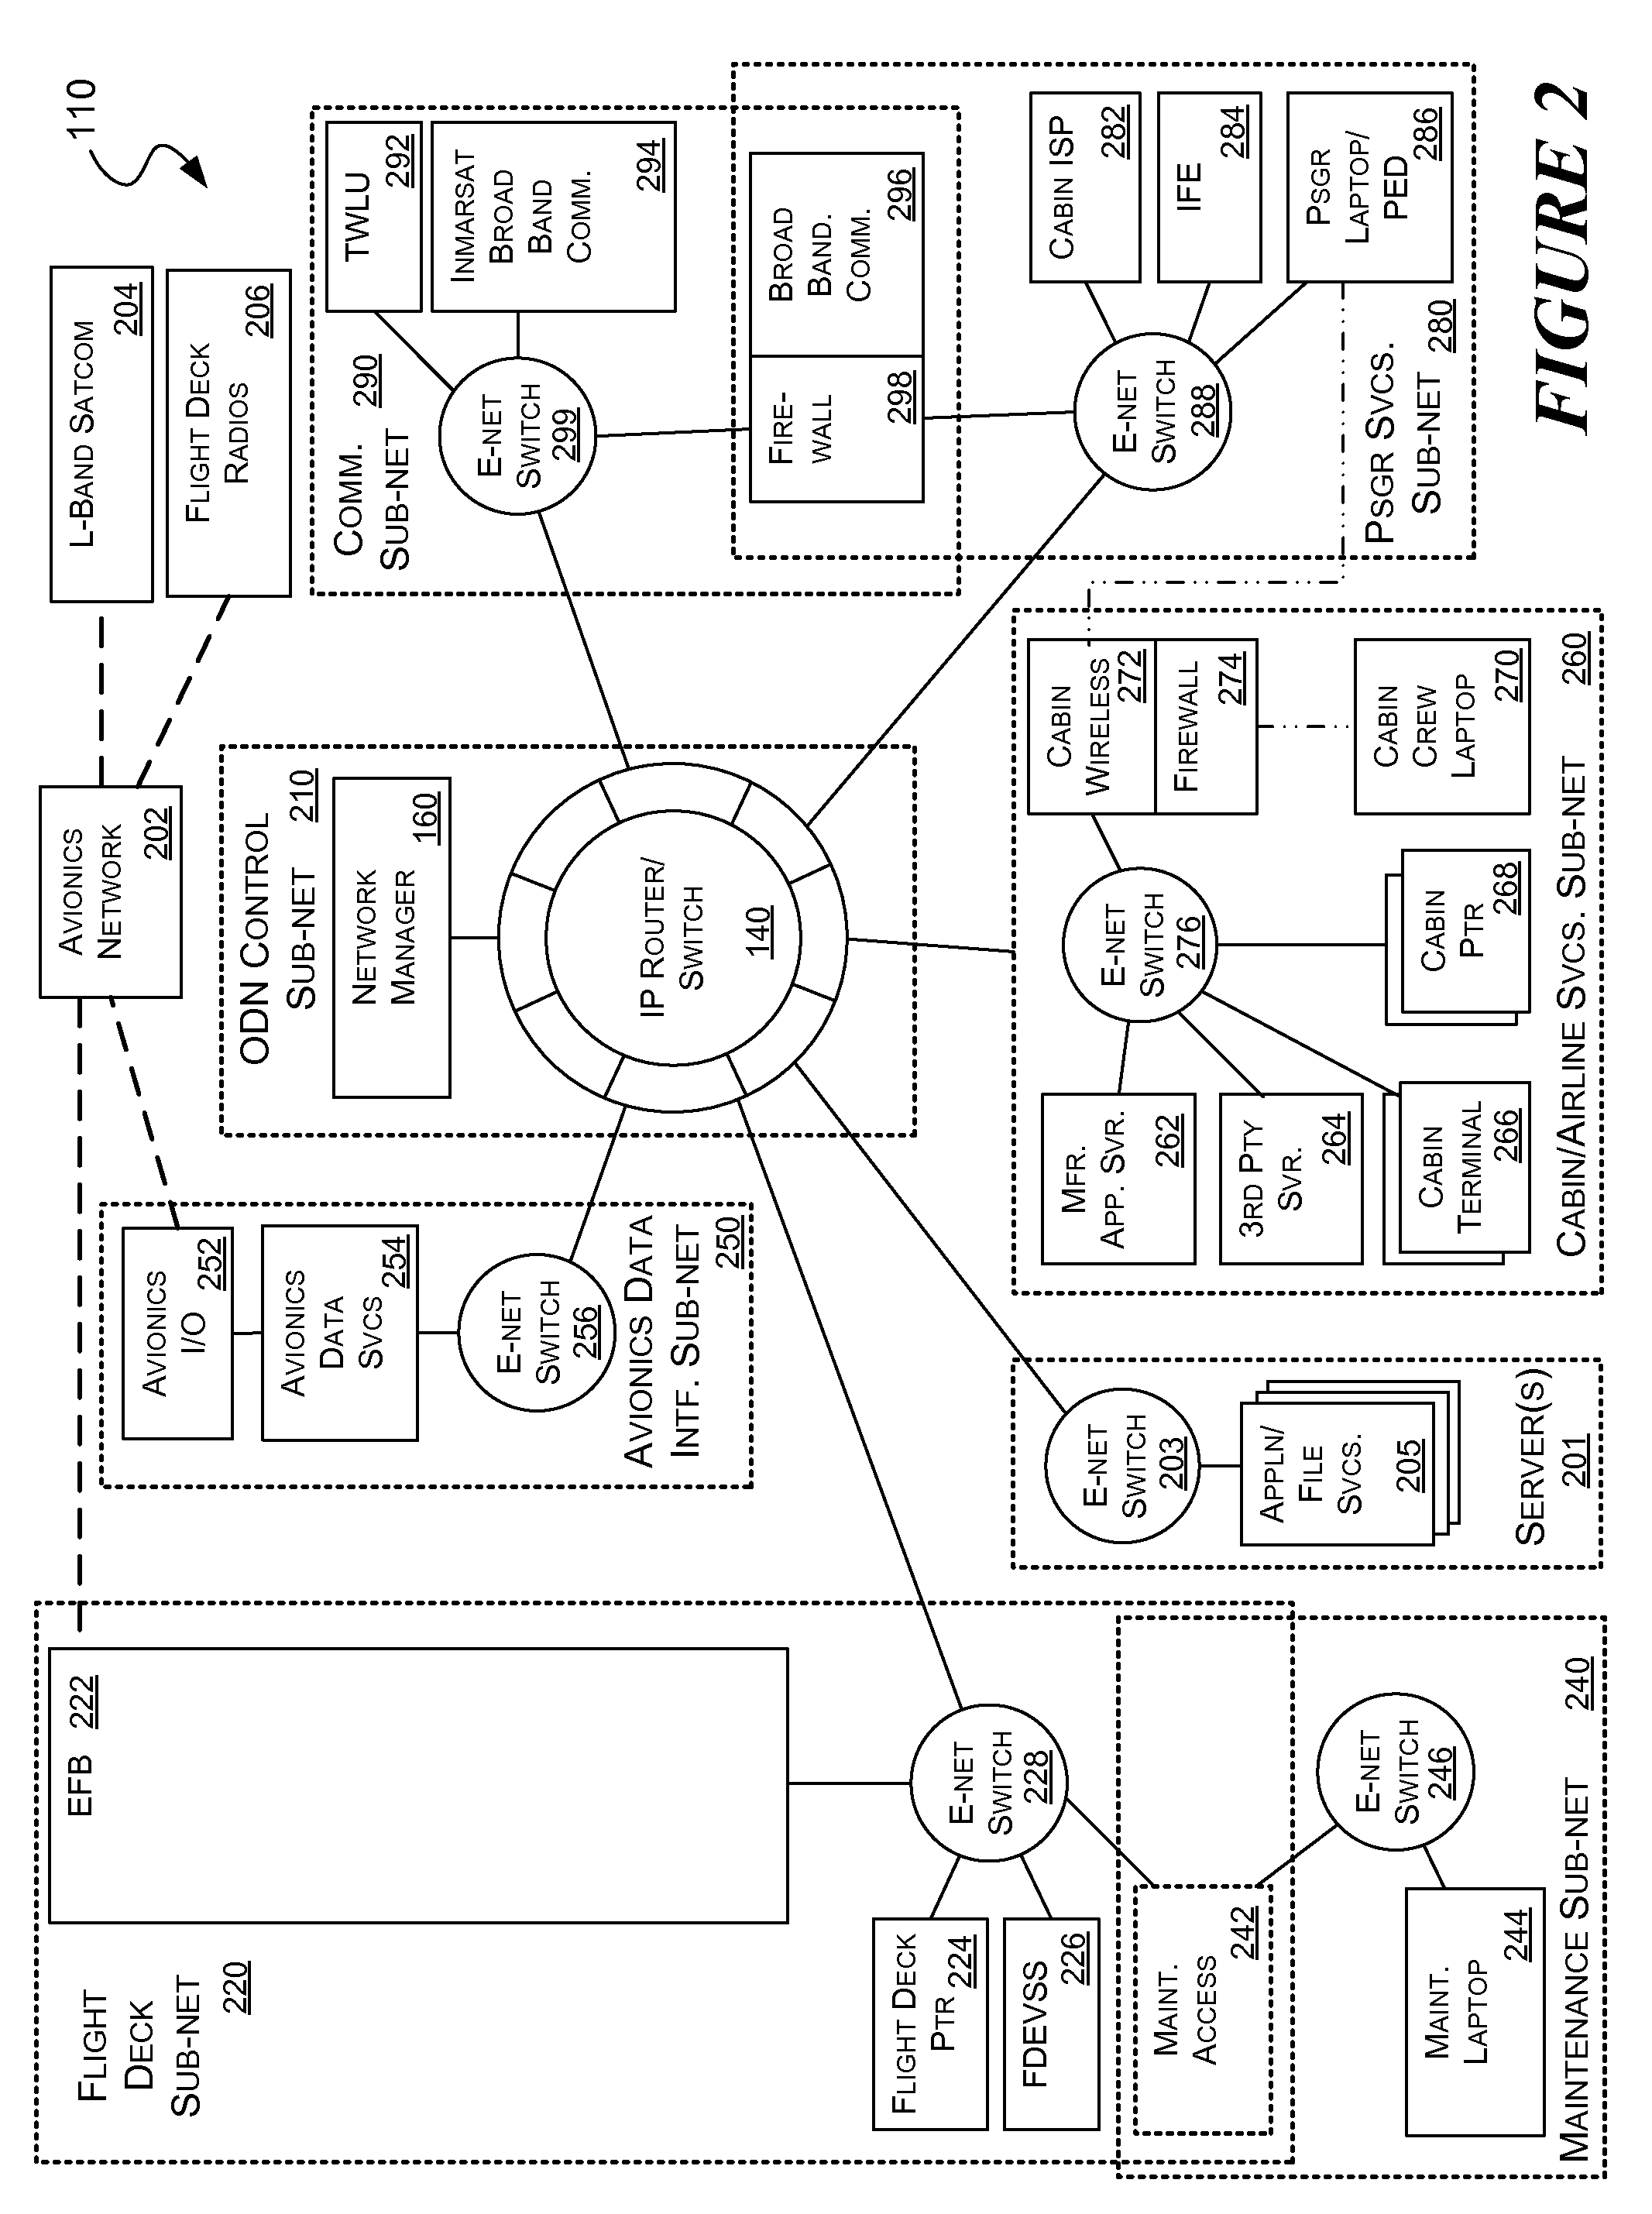 Scalable On-Board Open Data Network Architecture